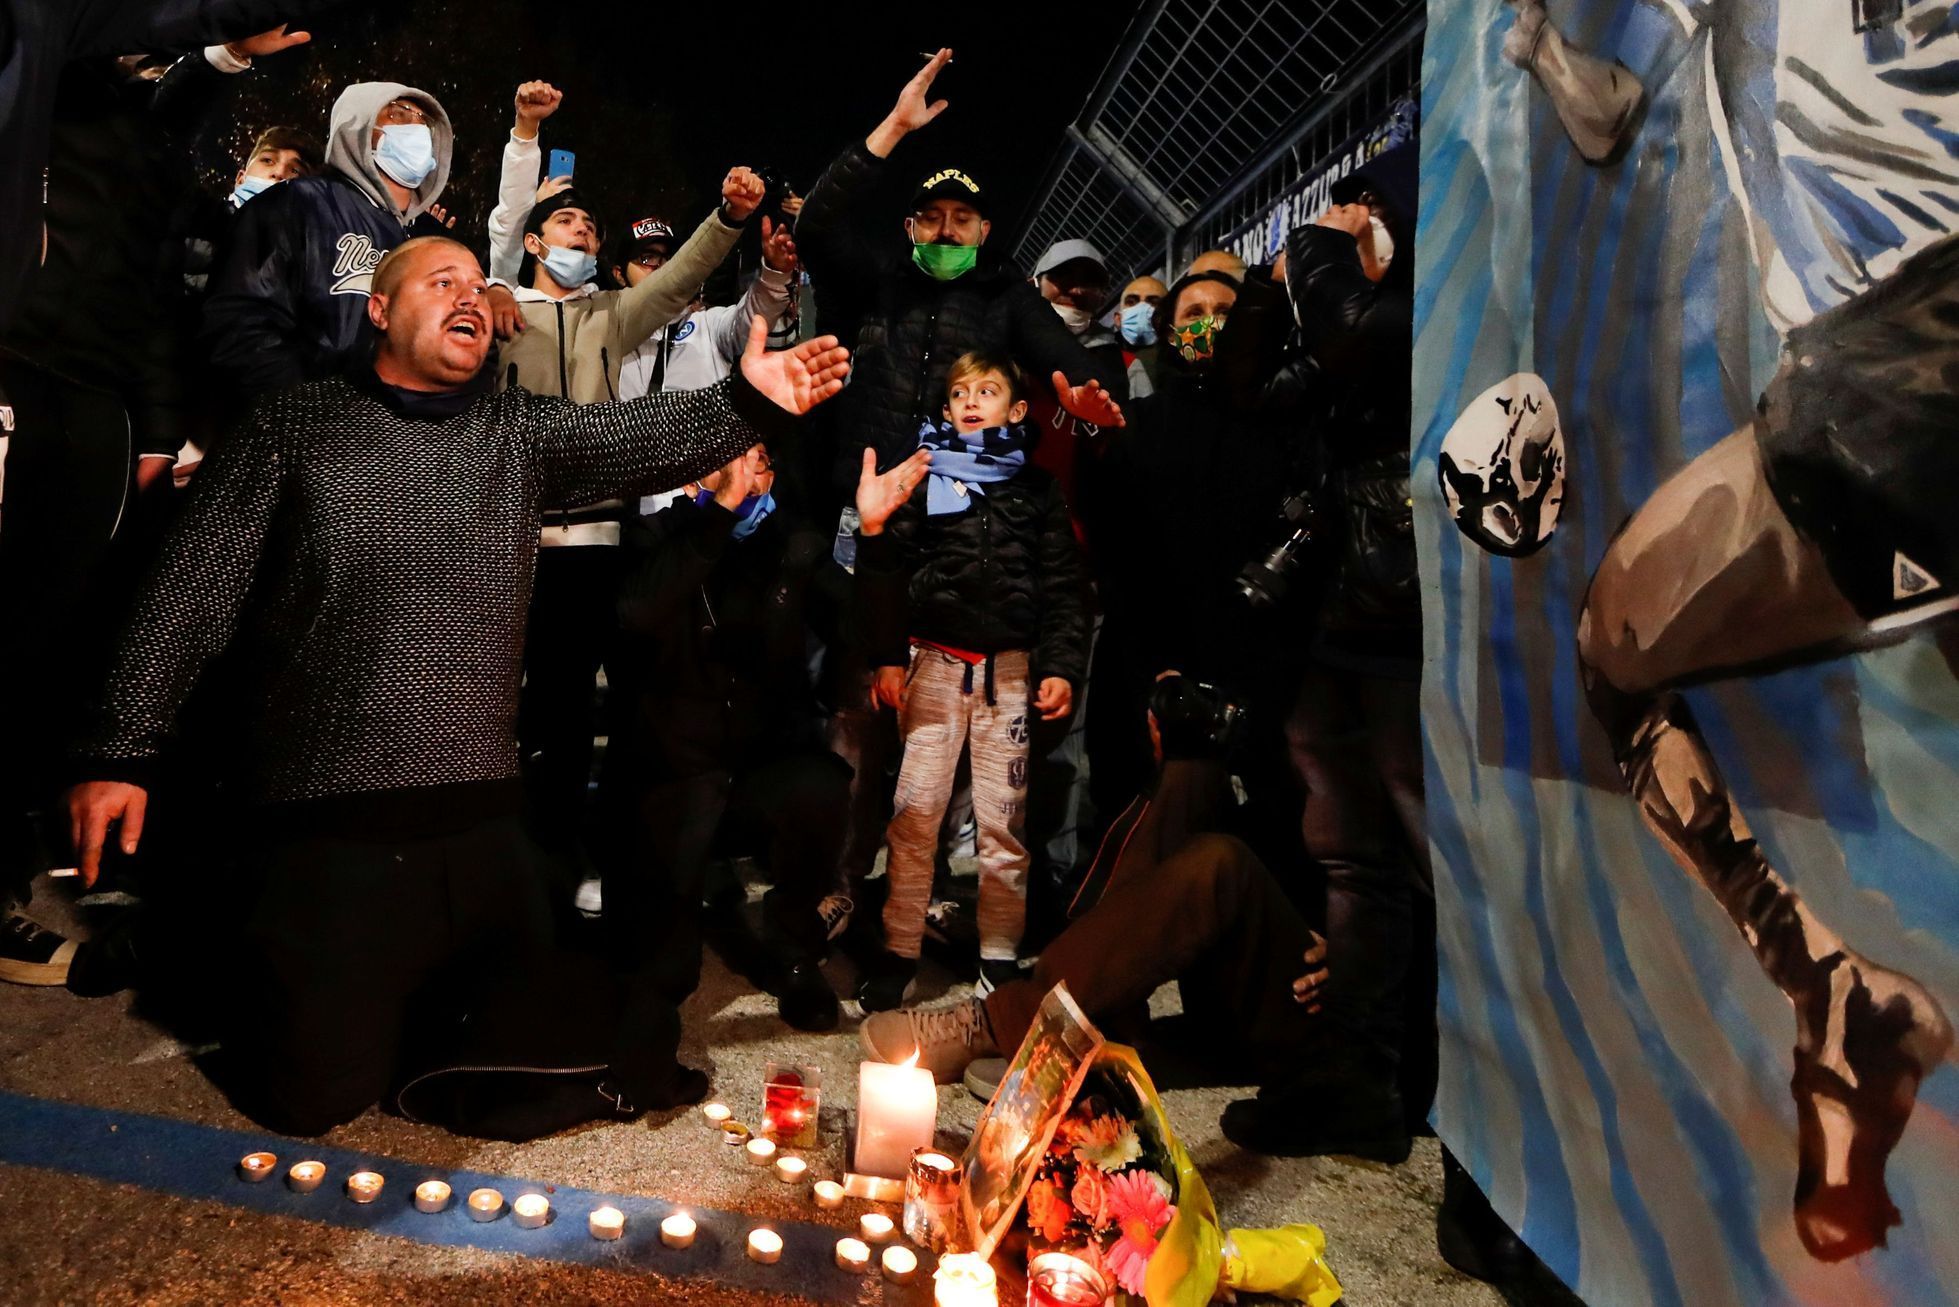 People gather to mourn the death of Argentine soccer legend Diego Maradona, in Naples